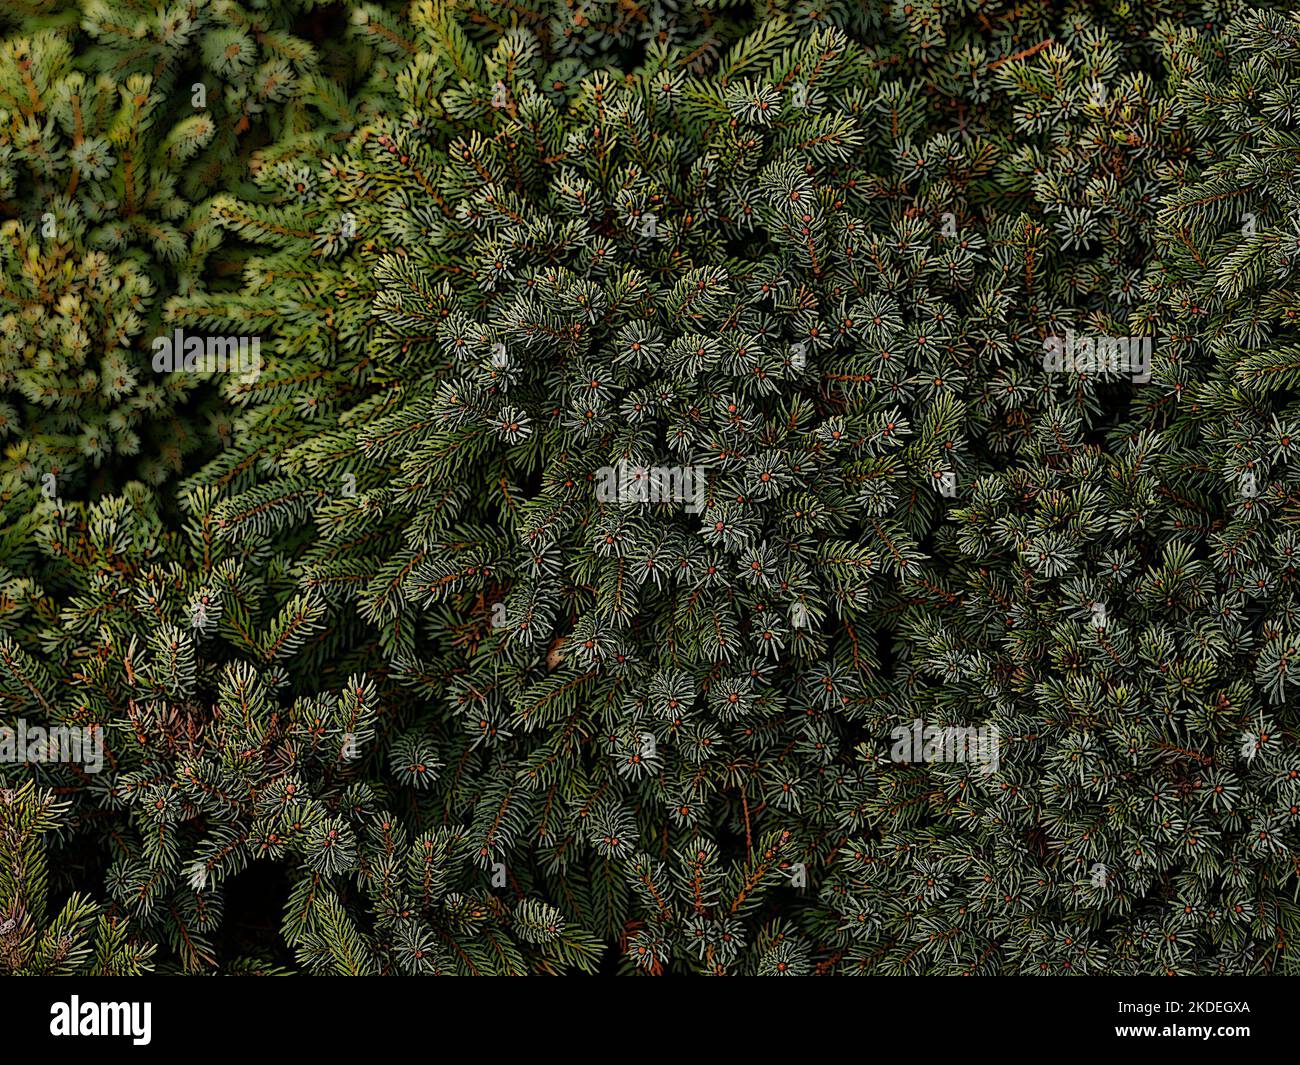 Illustrative close up of the compact and slow growing dwarf conifer Picea mariana Nana. Stock Photo